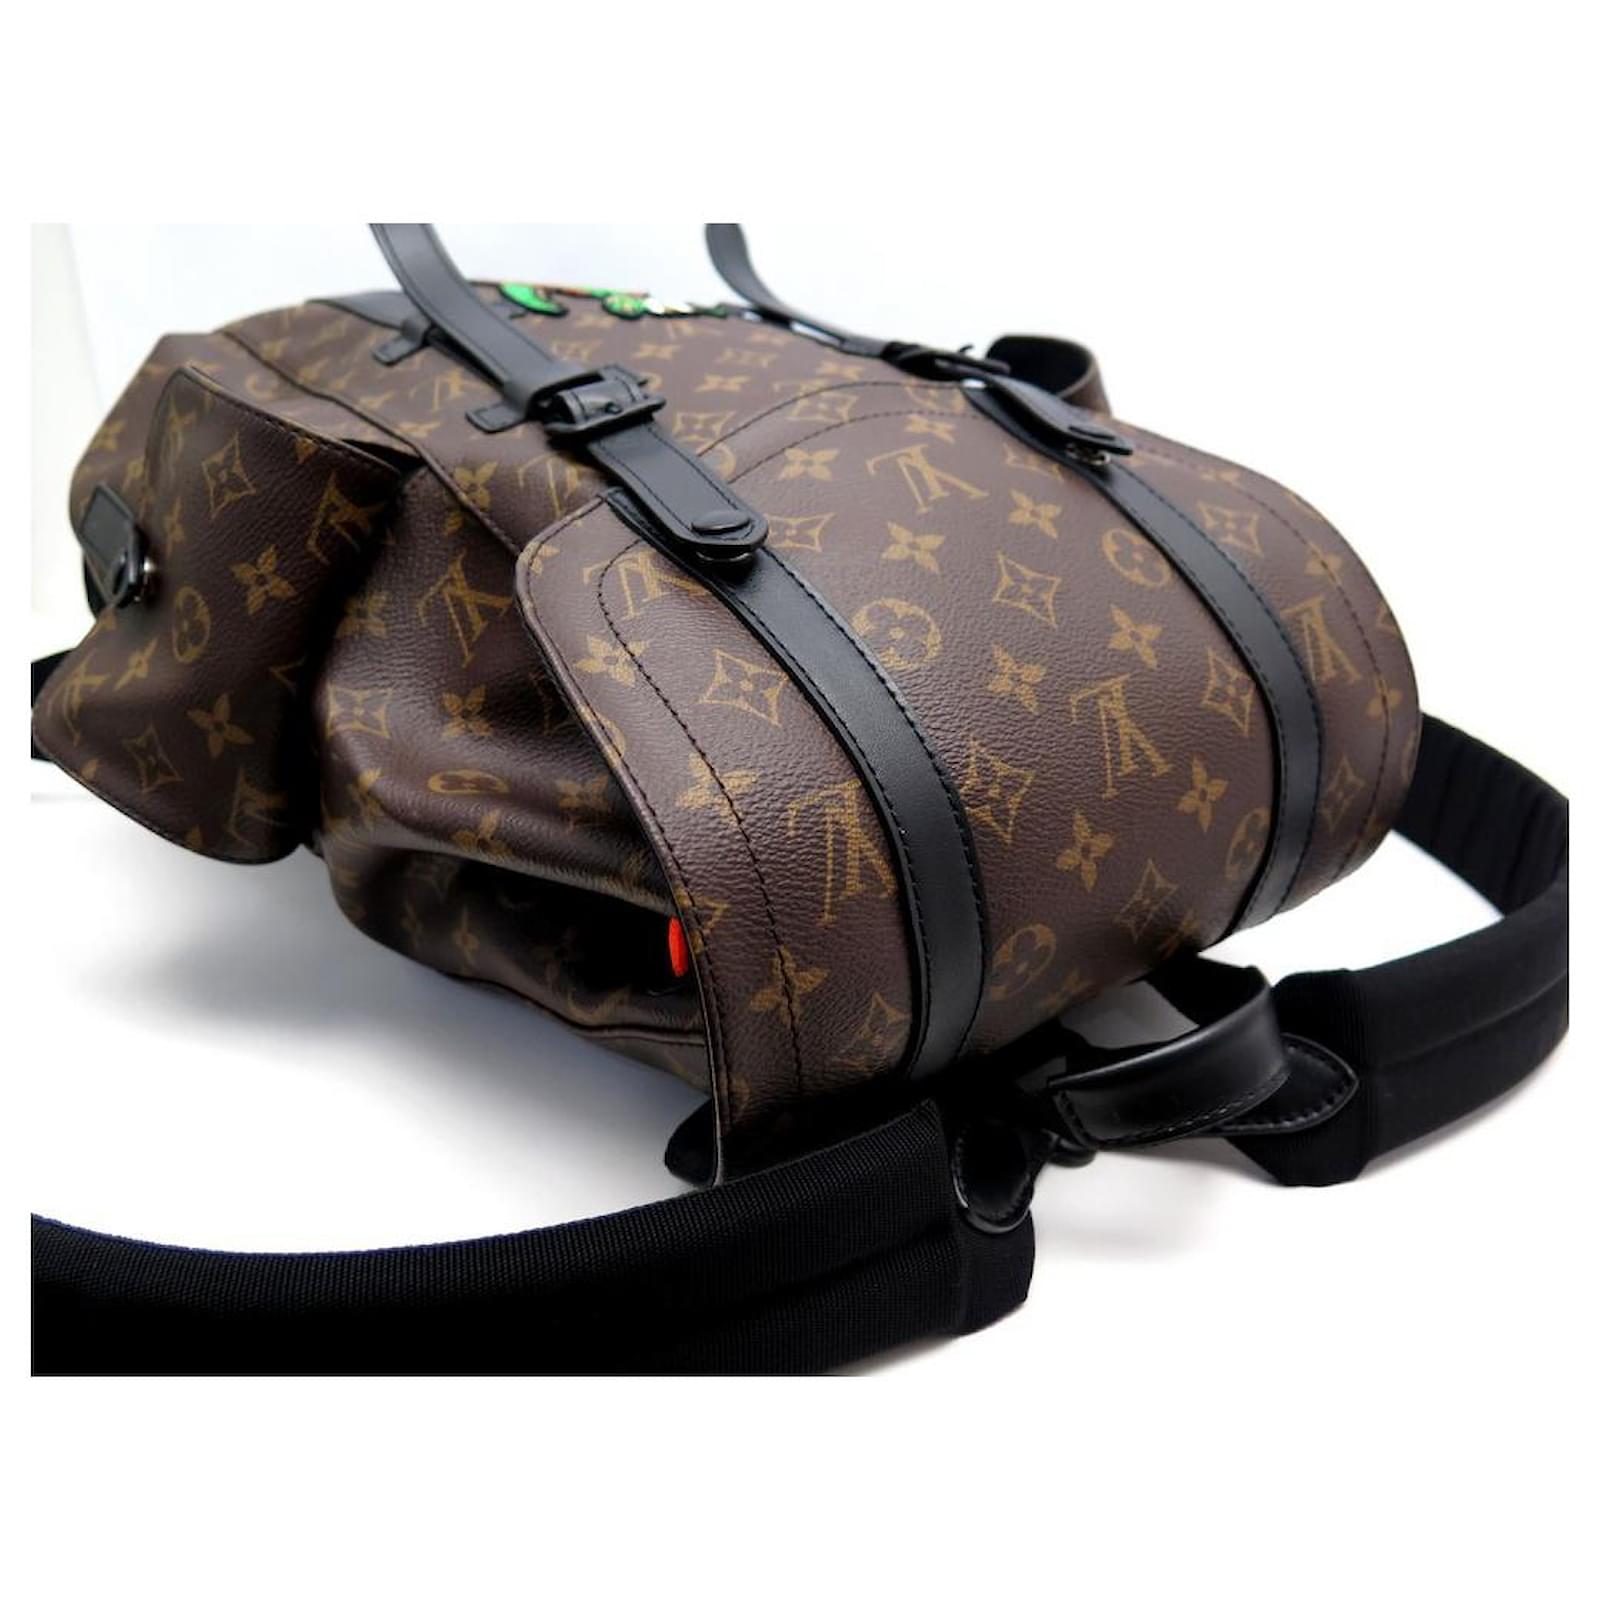 Louis Vuitton Christopher PM backpack. Message